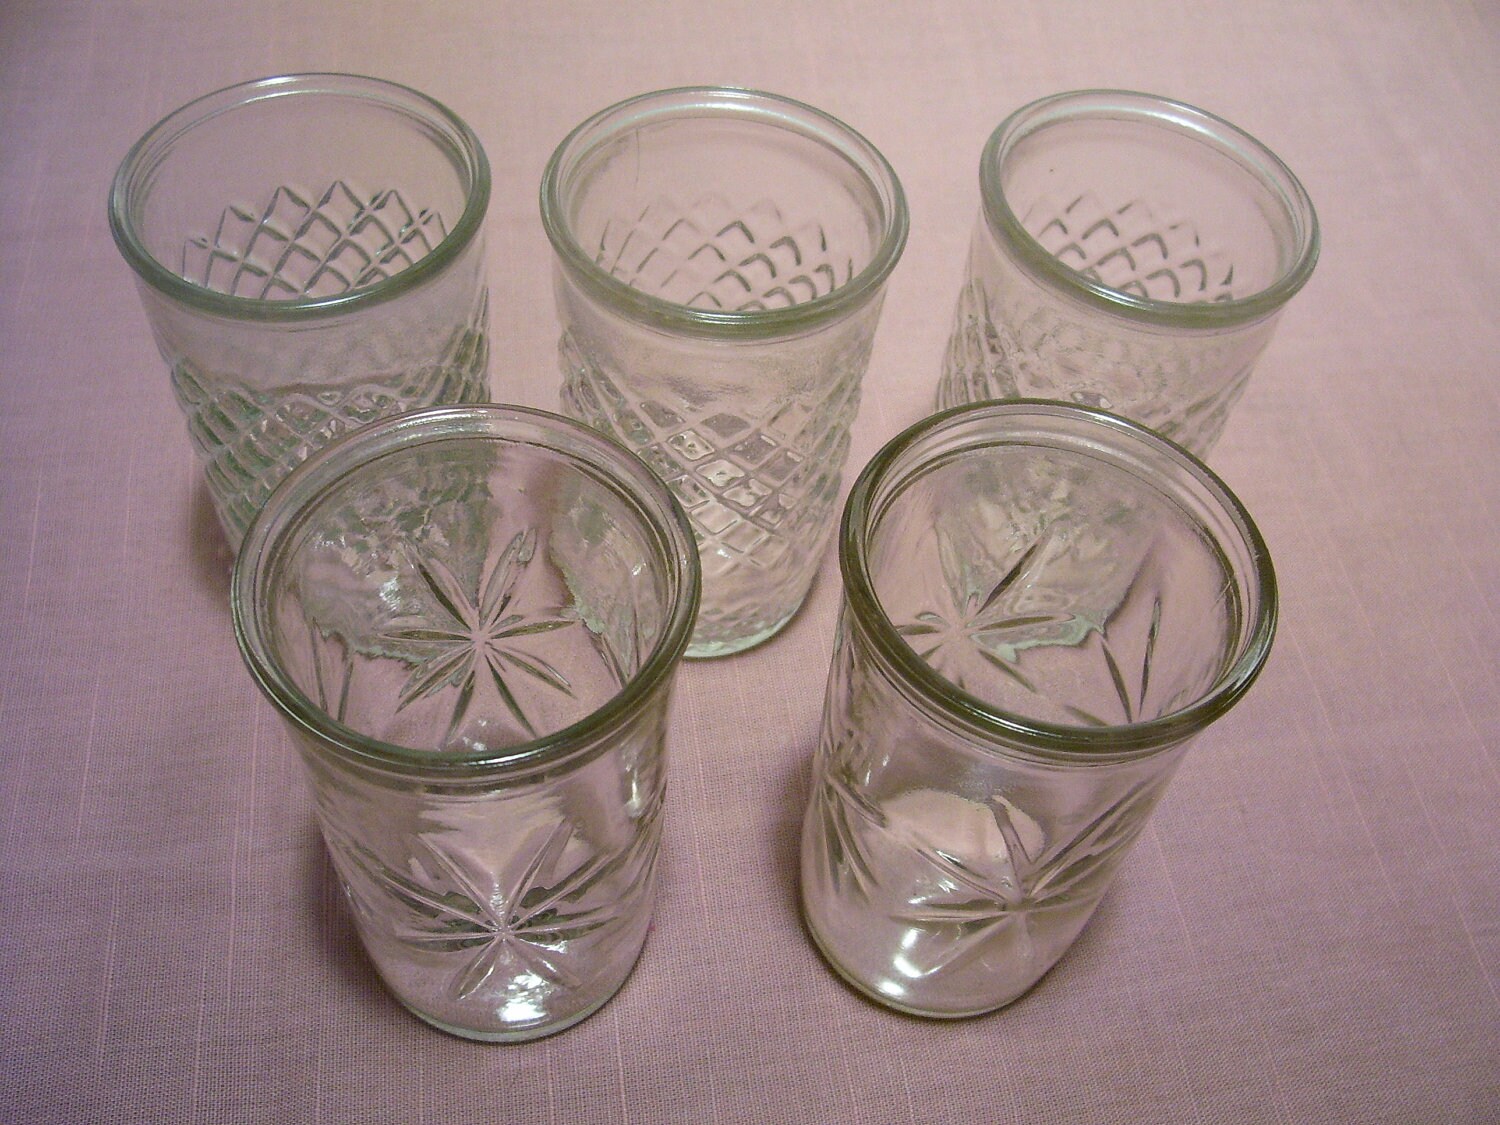 Vintage Jelly Jar Juice Glasses 5 By Bubbiesmemories On Etsy